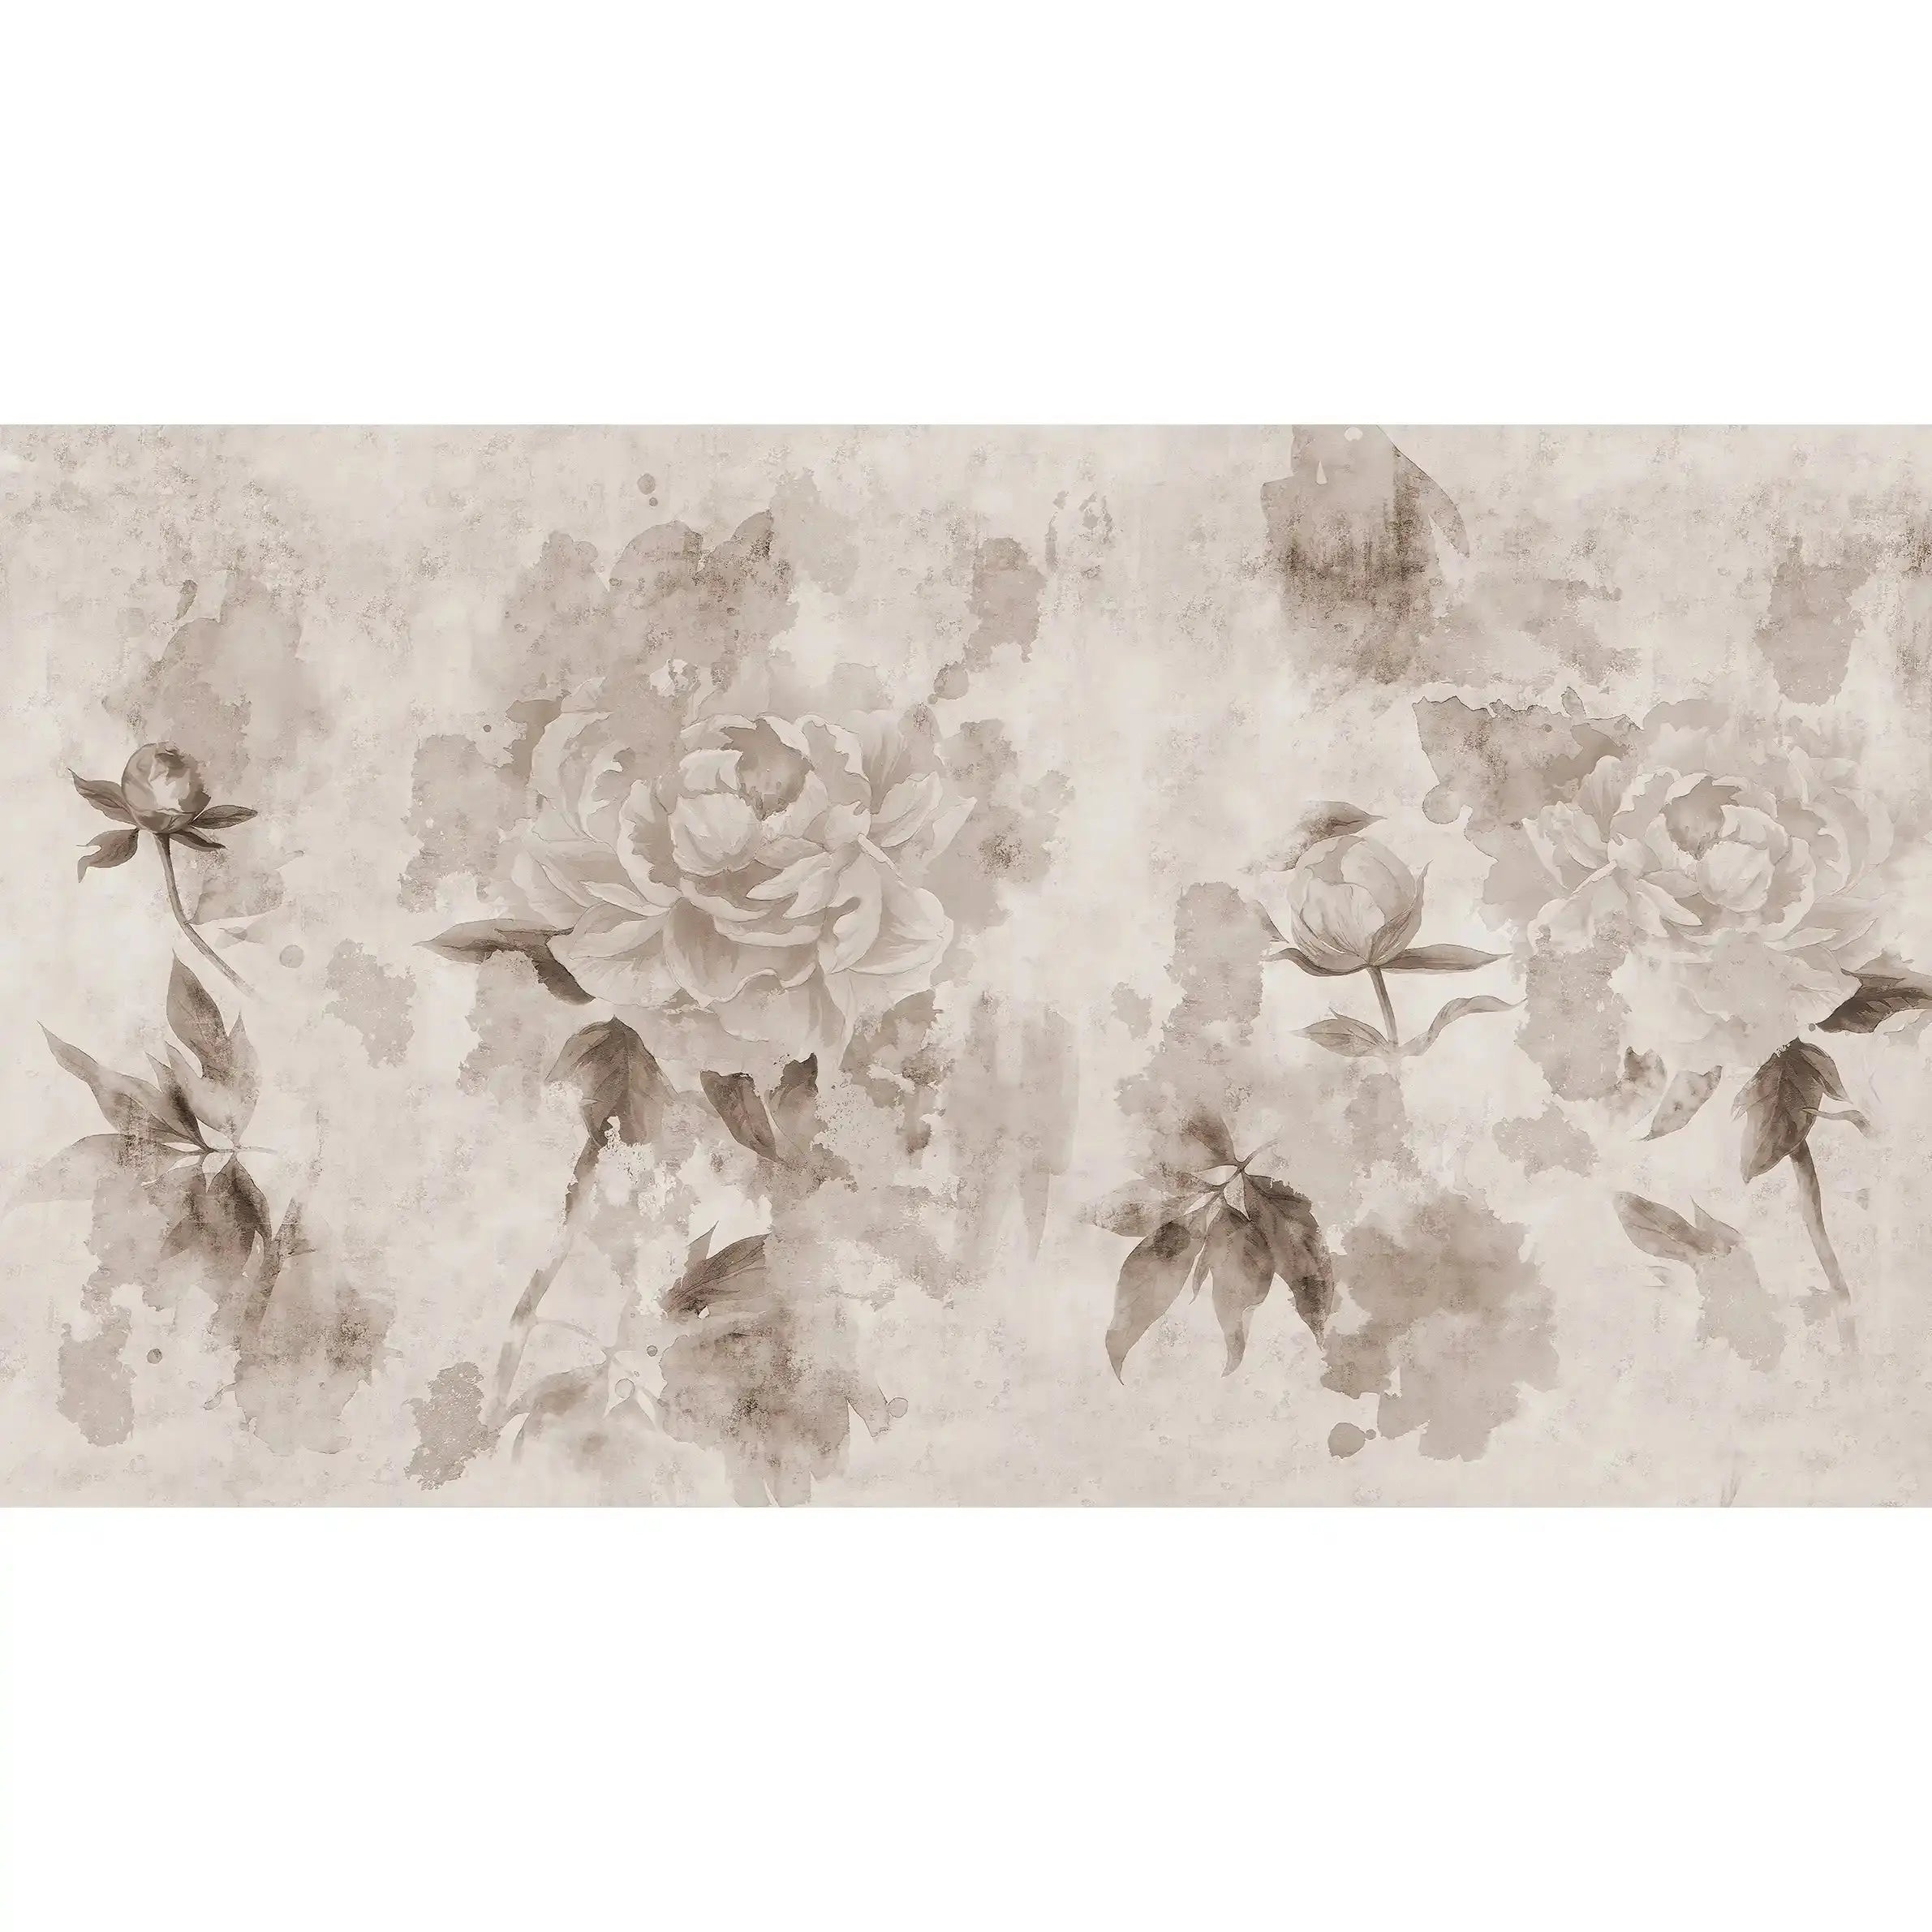 3004-A / Watercolor Floral Peel and Stick Wallpaper - Peony Design for Modern Room Decor, Perfect for Bedroom and Bathroom - Artevella